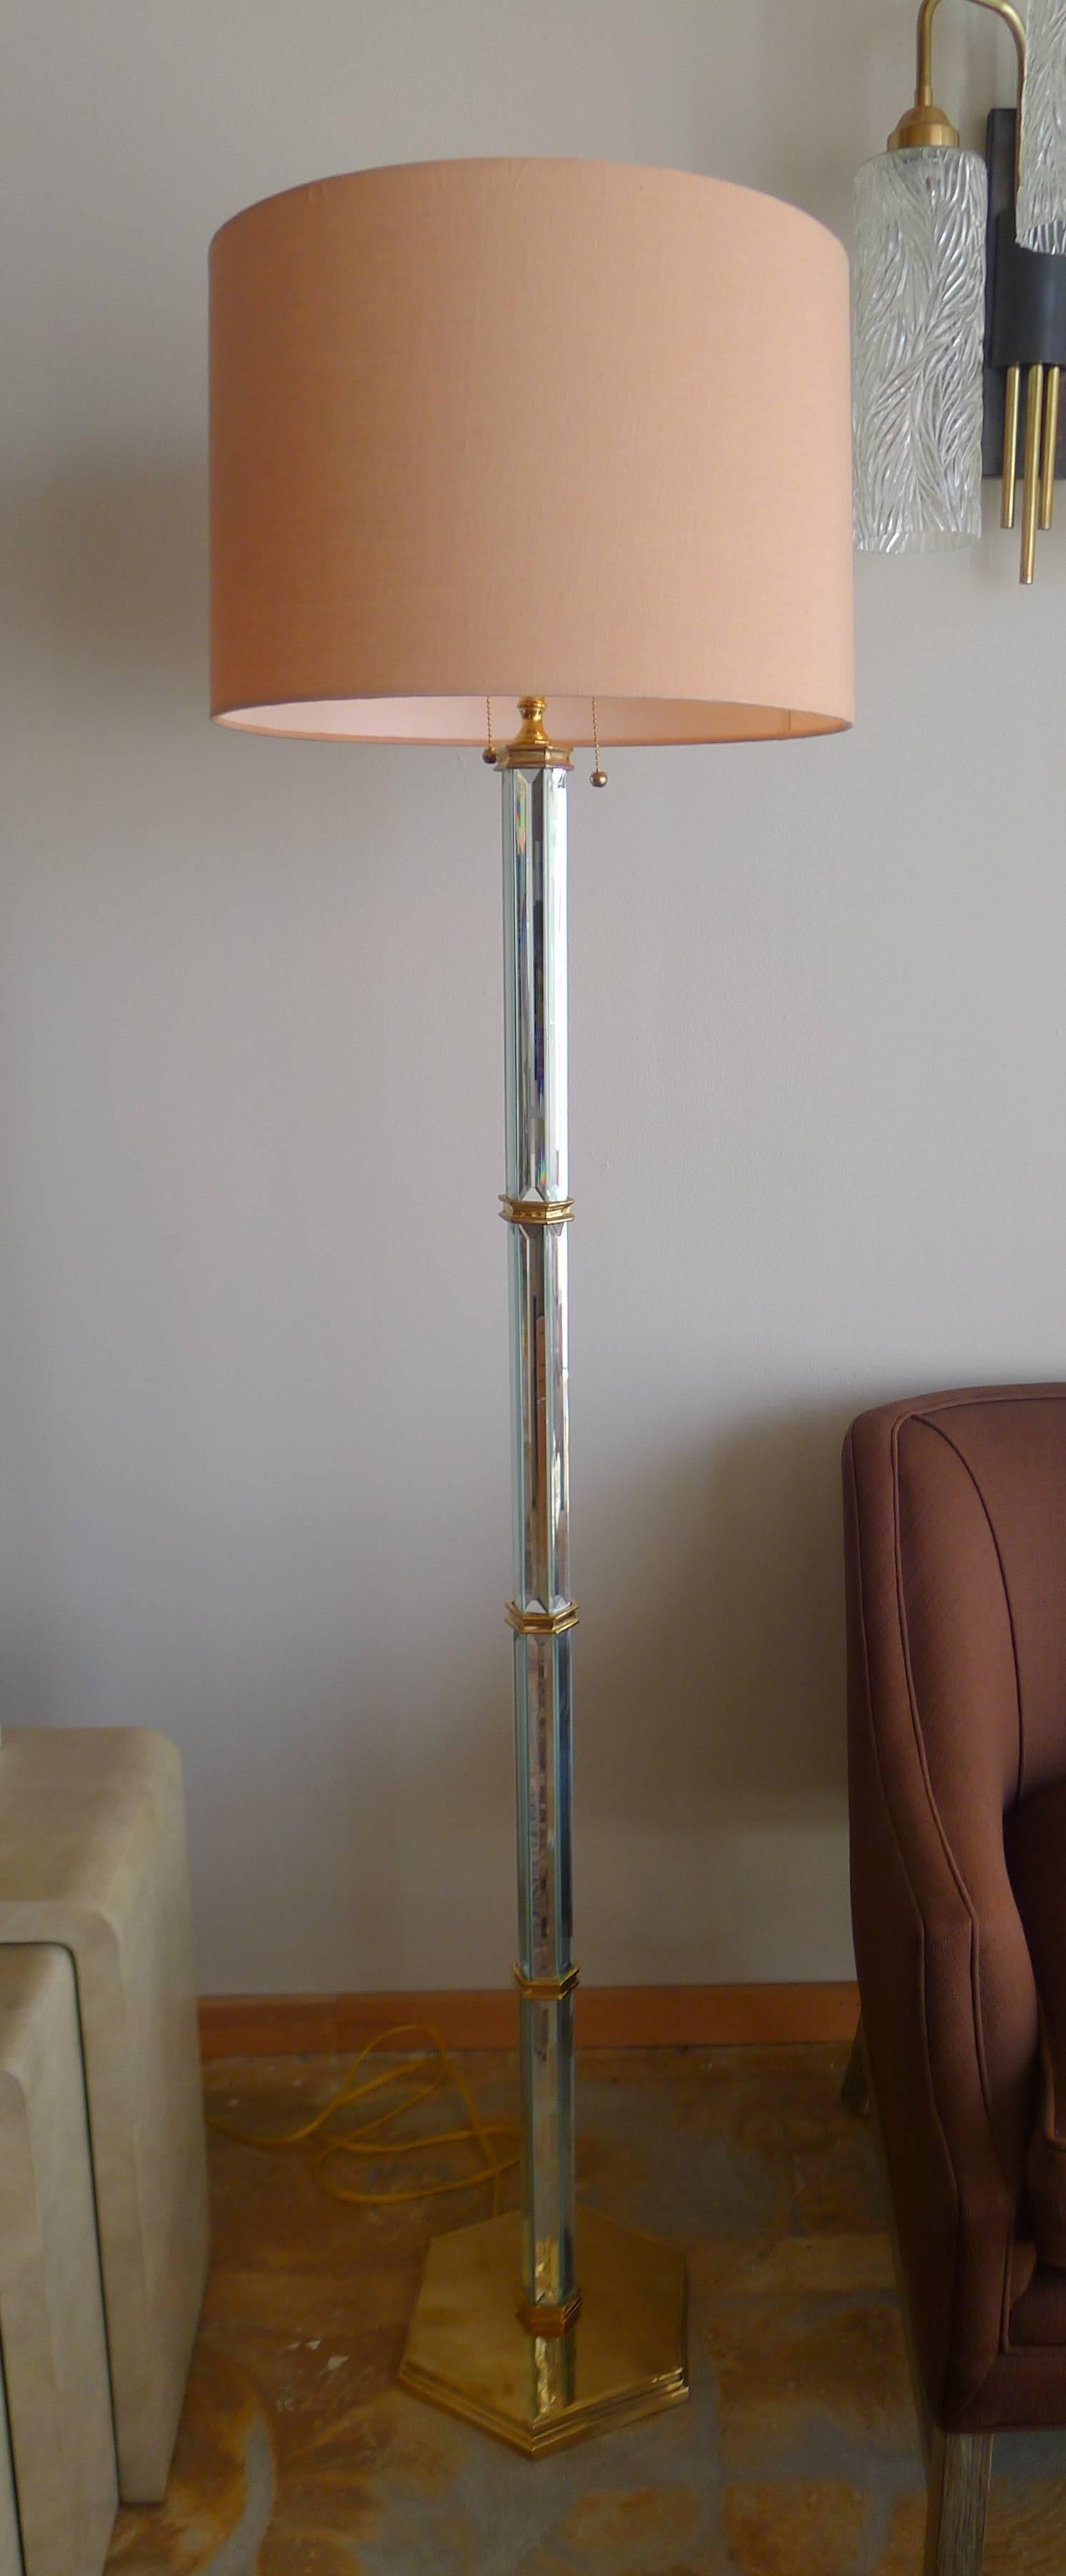 Paul Marra Brass and Beveled Mirror Floor Lamp In Excellent Condition For Sale In Los Angeles, CA